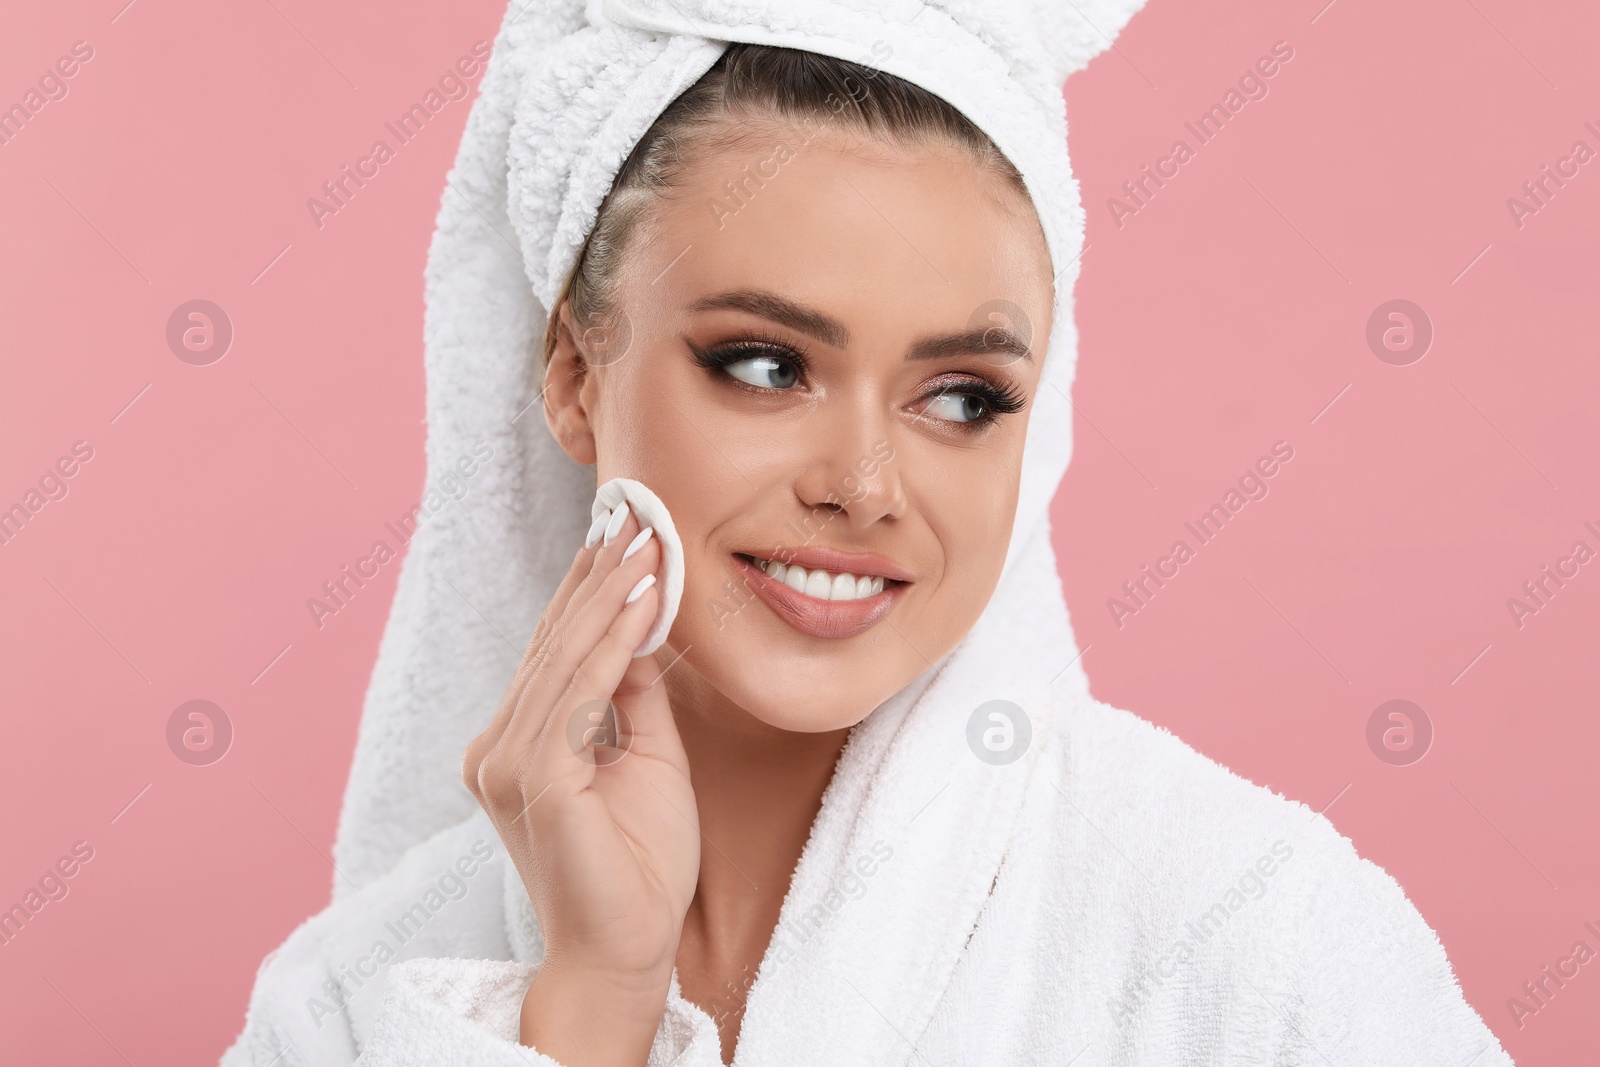 Photo of Beautiful woman removing makeup with cotton pad on pink background